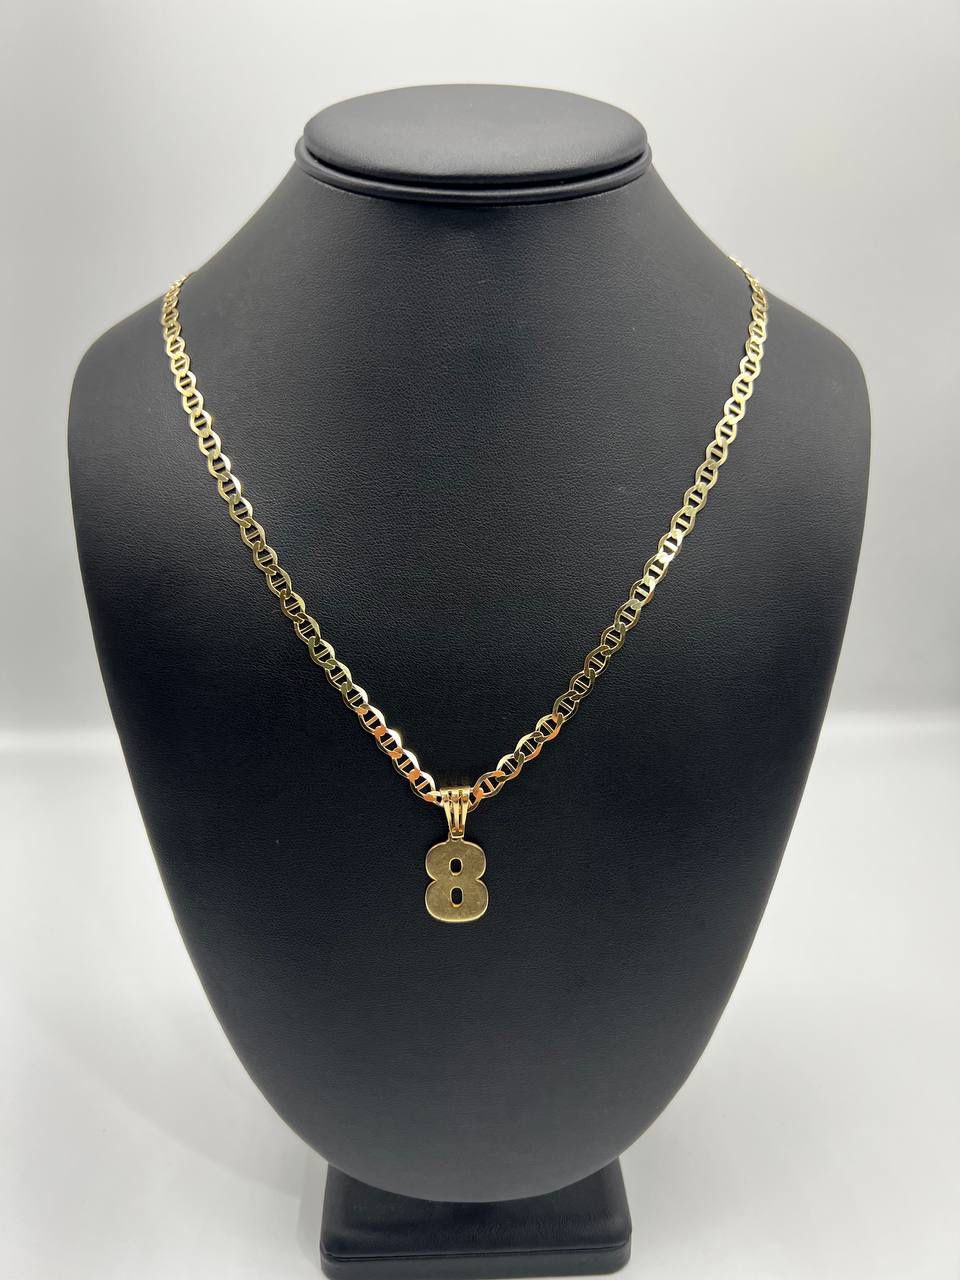 10k solid gold Mariner necklace chain with number "8" pendant made of 10k solid gold